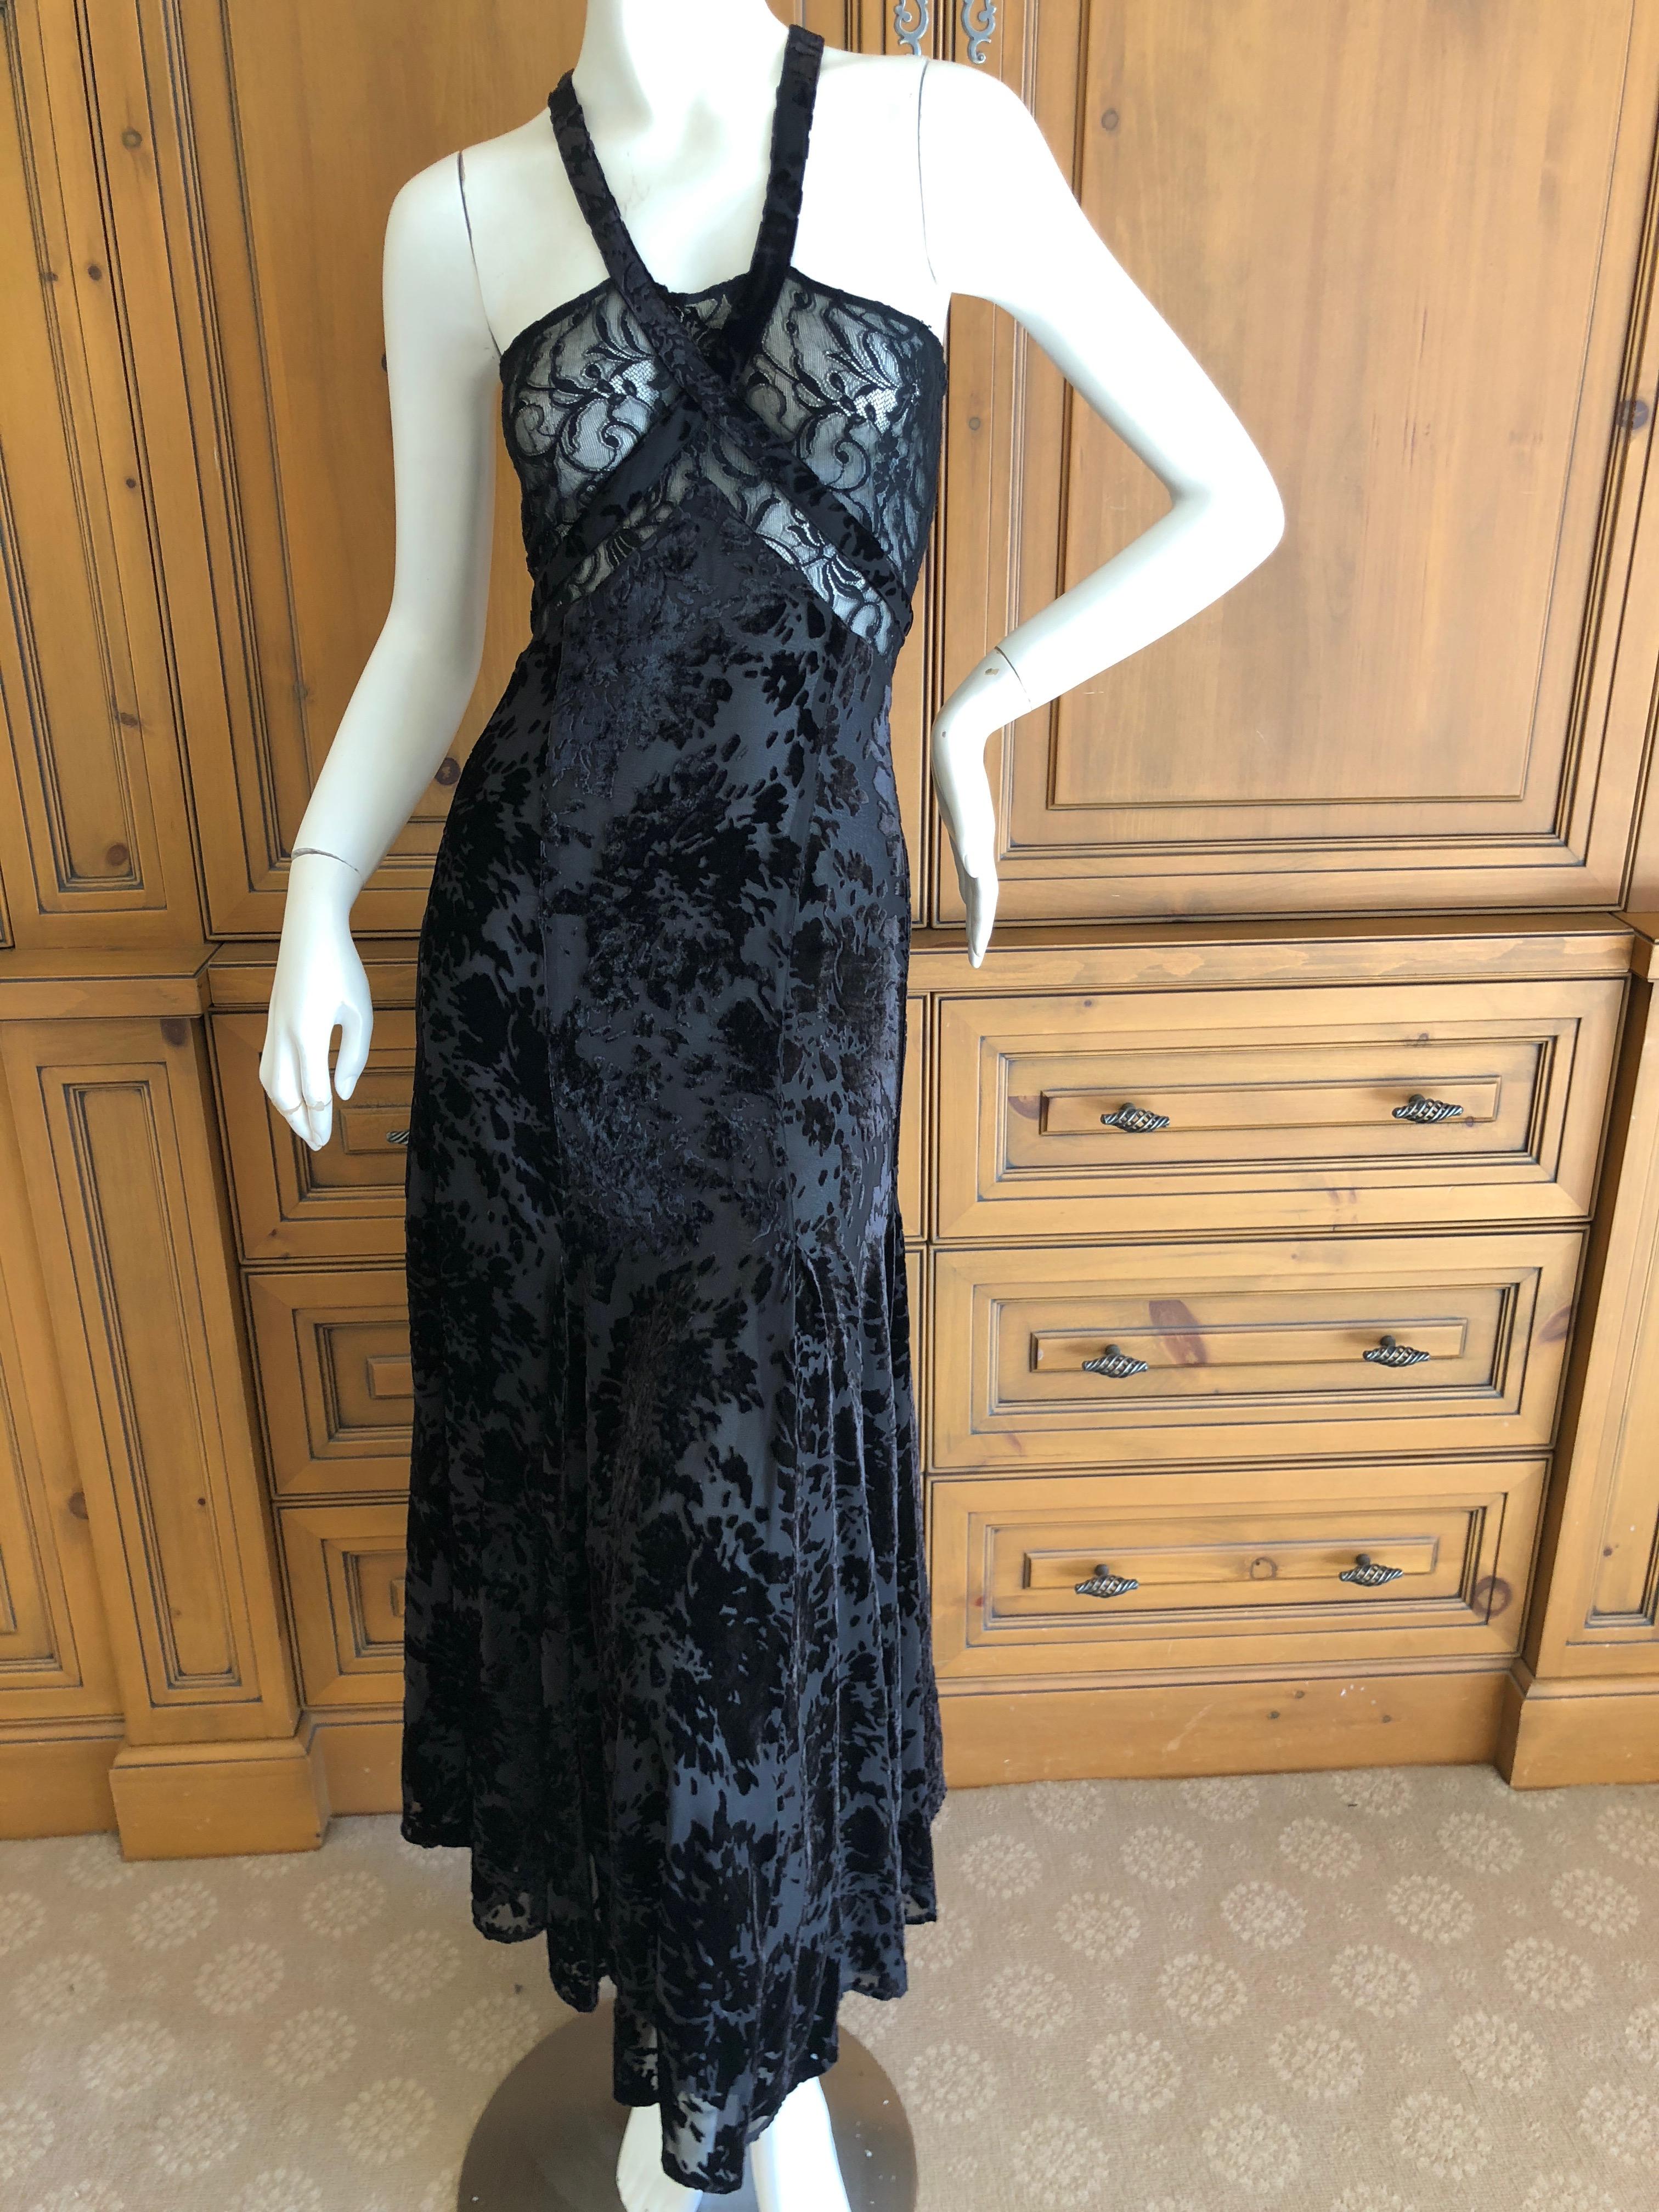 Sonia Rykiel Devore Velvet and Lace Vintage Dress.
I also show it with the slip pulled up, to show how it would look without it.
Marked size 42
Bust 36